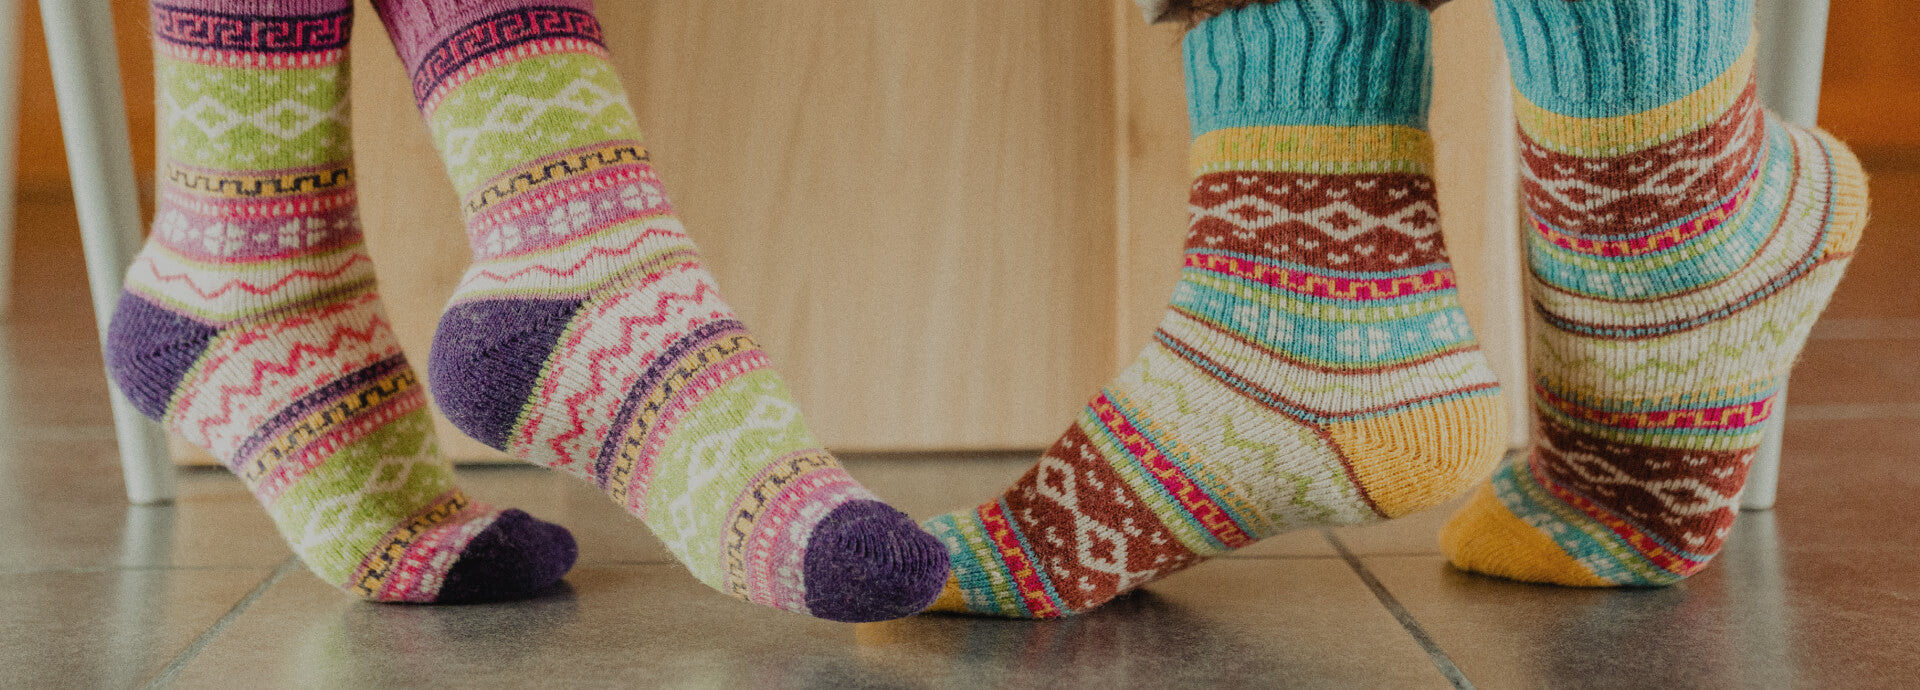 Socks and personality: How to choose your style